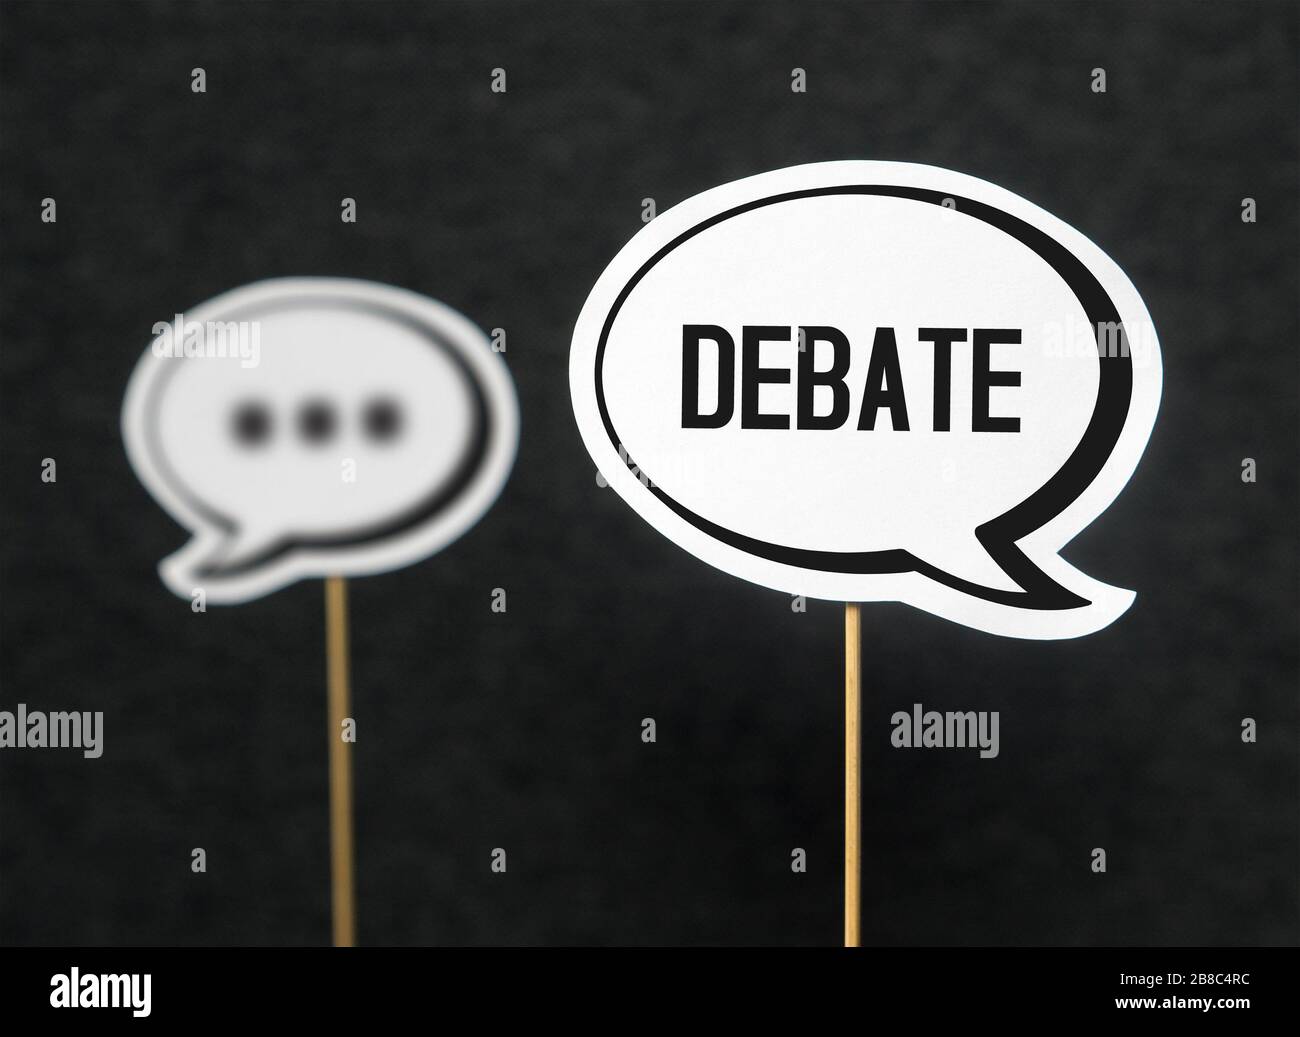 Debate, dialog, communication and education concept. Talking about political opinions. Two cardboard speech bubbles. Stock Photo